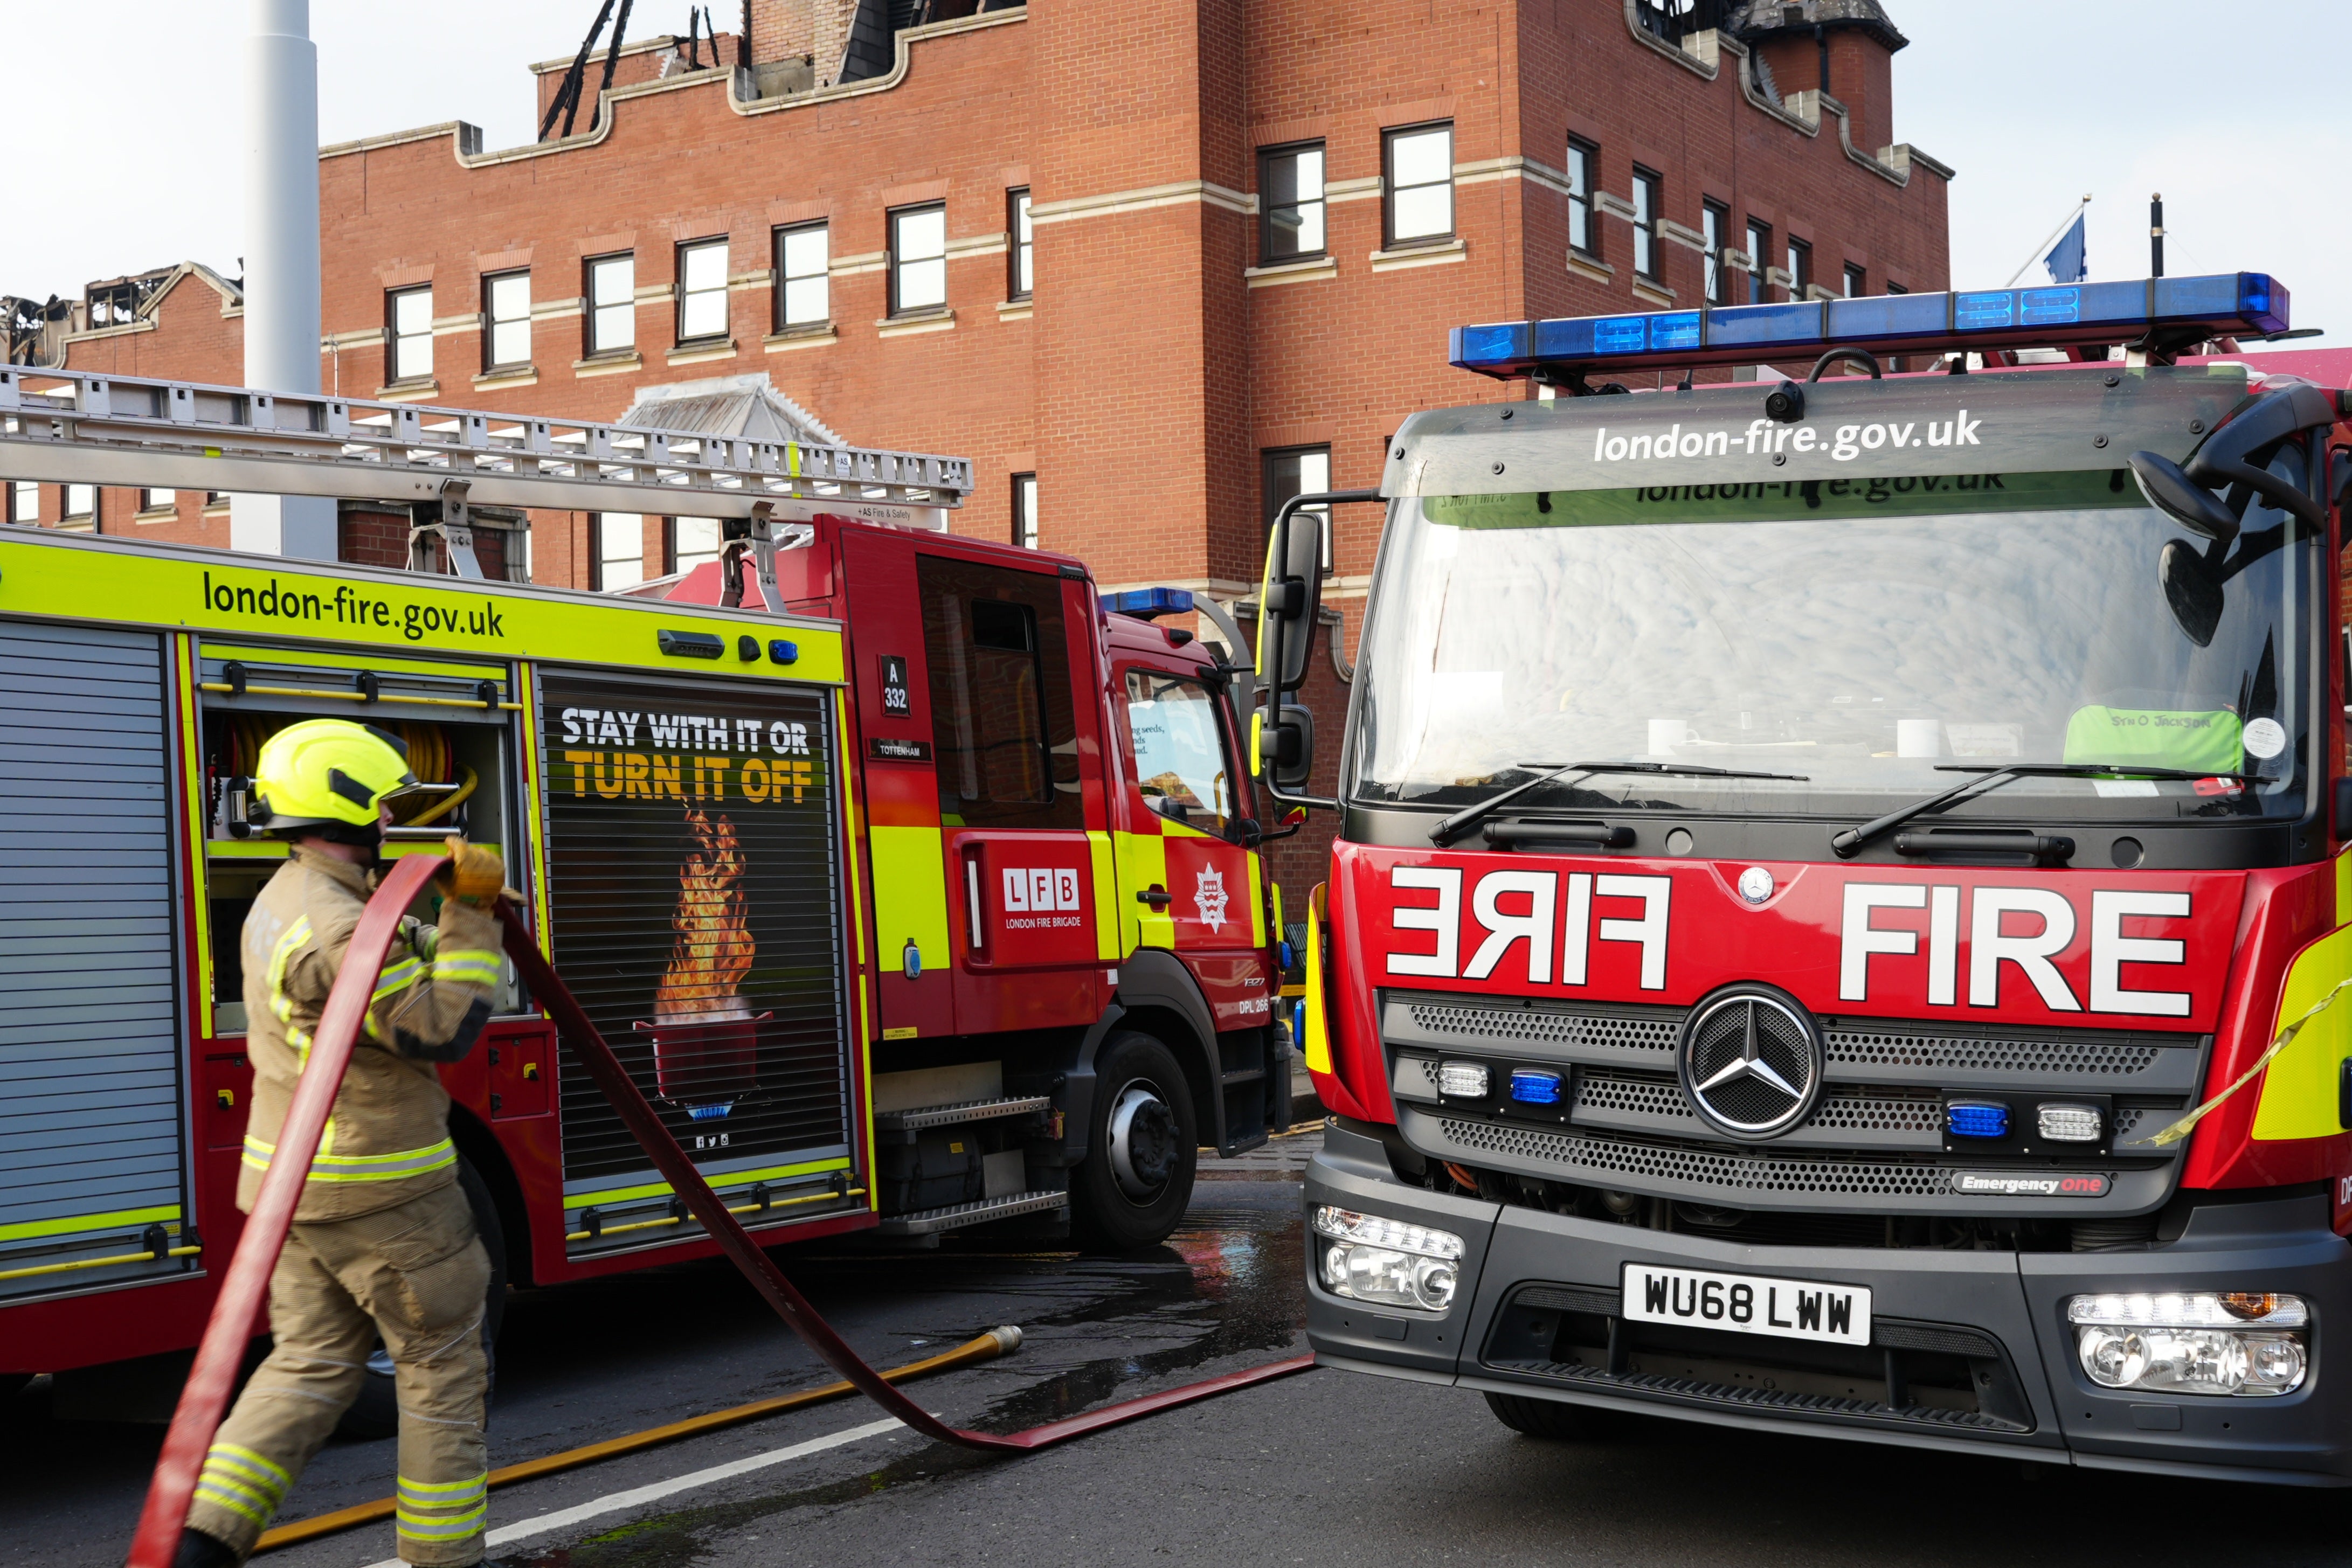 matt wrack, prime minister, fire brigades union, fire, general election, sir keir starmer, starmer warned rescuing ‘dangerously underfunded’ fire service must be a first priority as prime minister